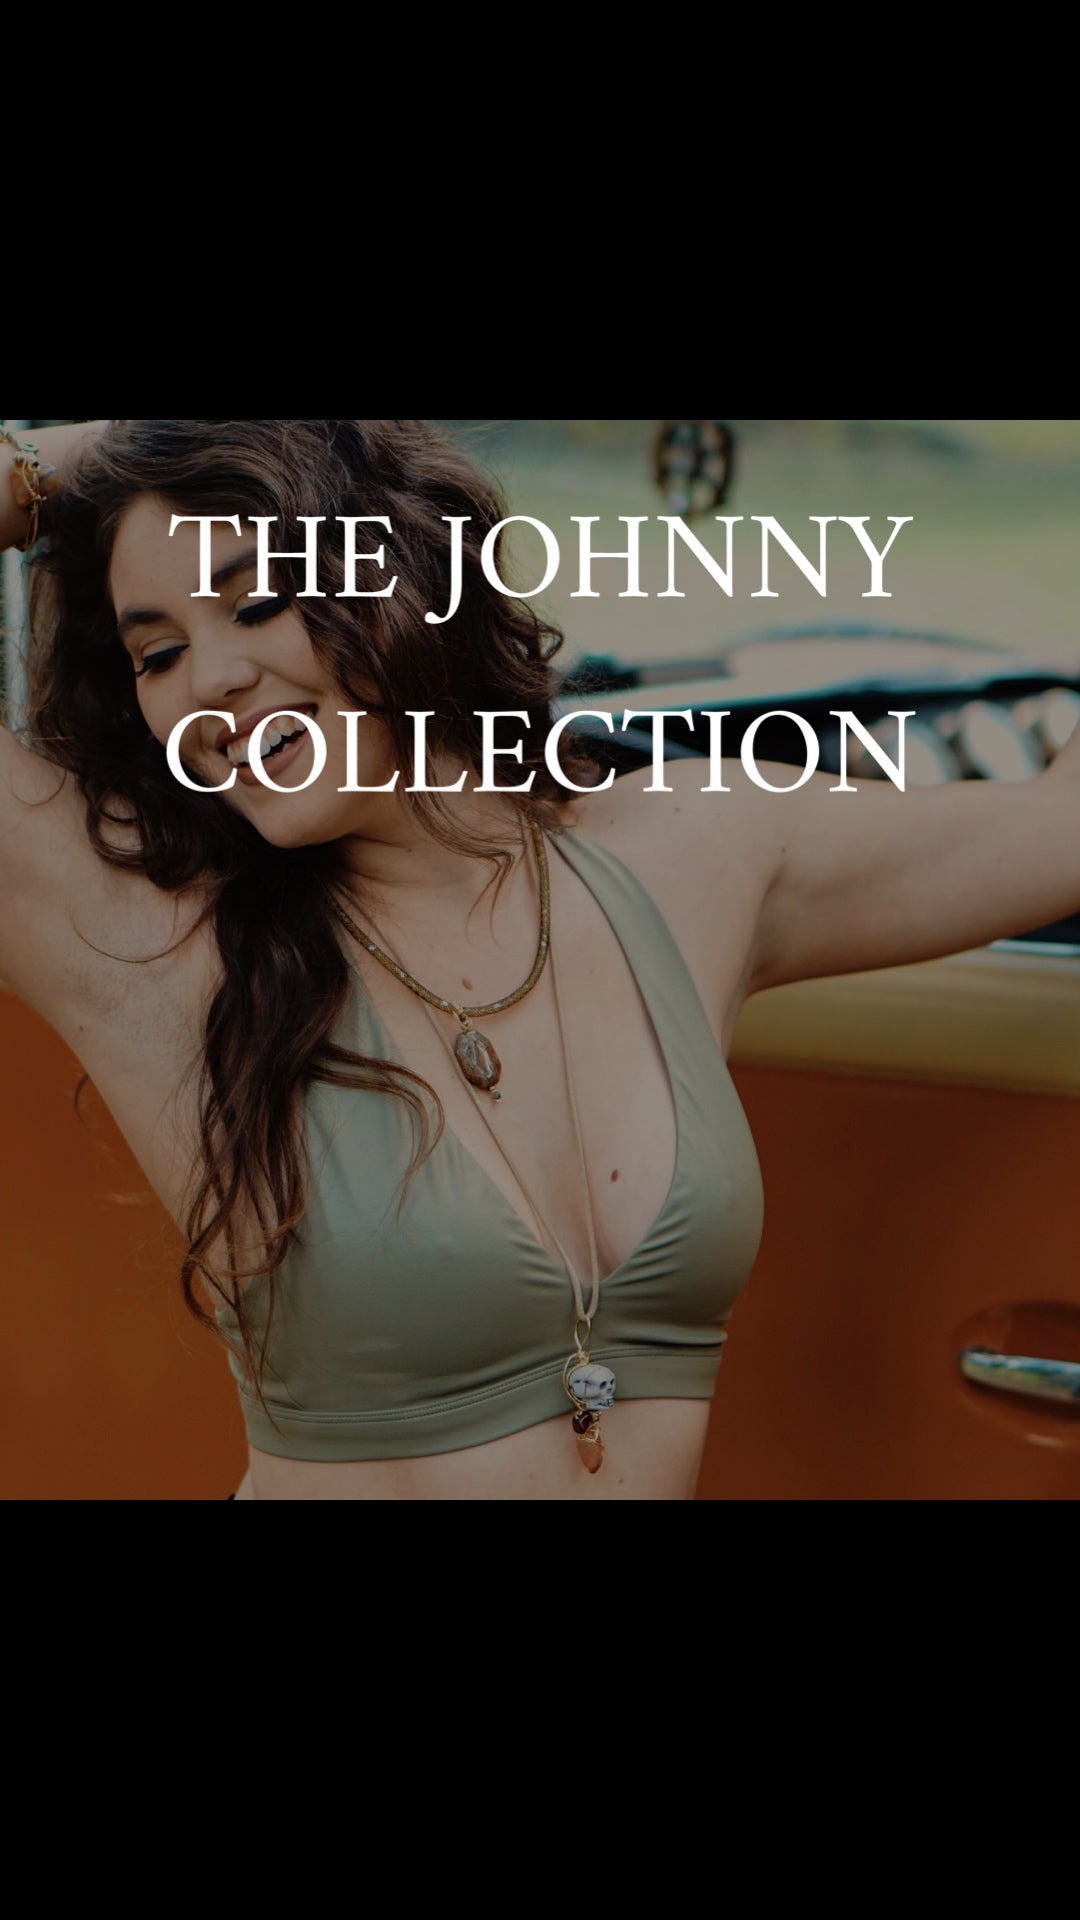 The Johnny Collection